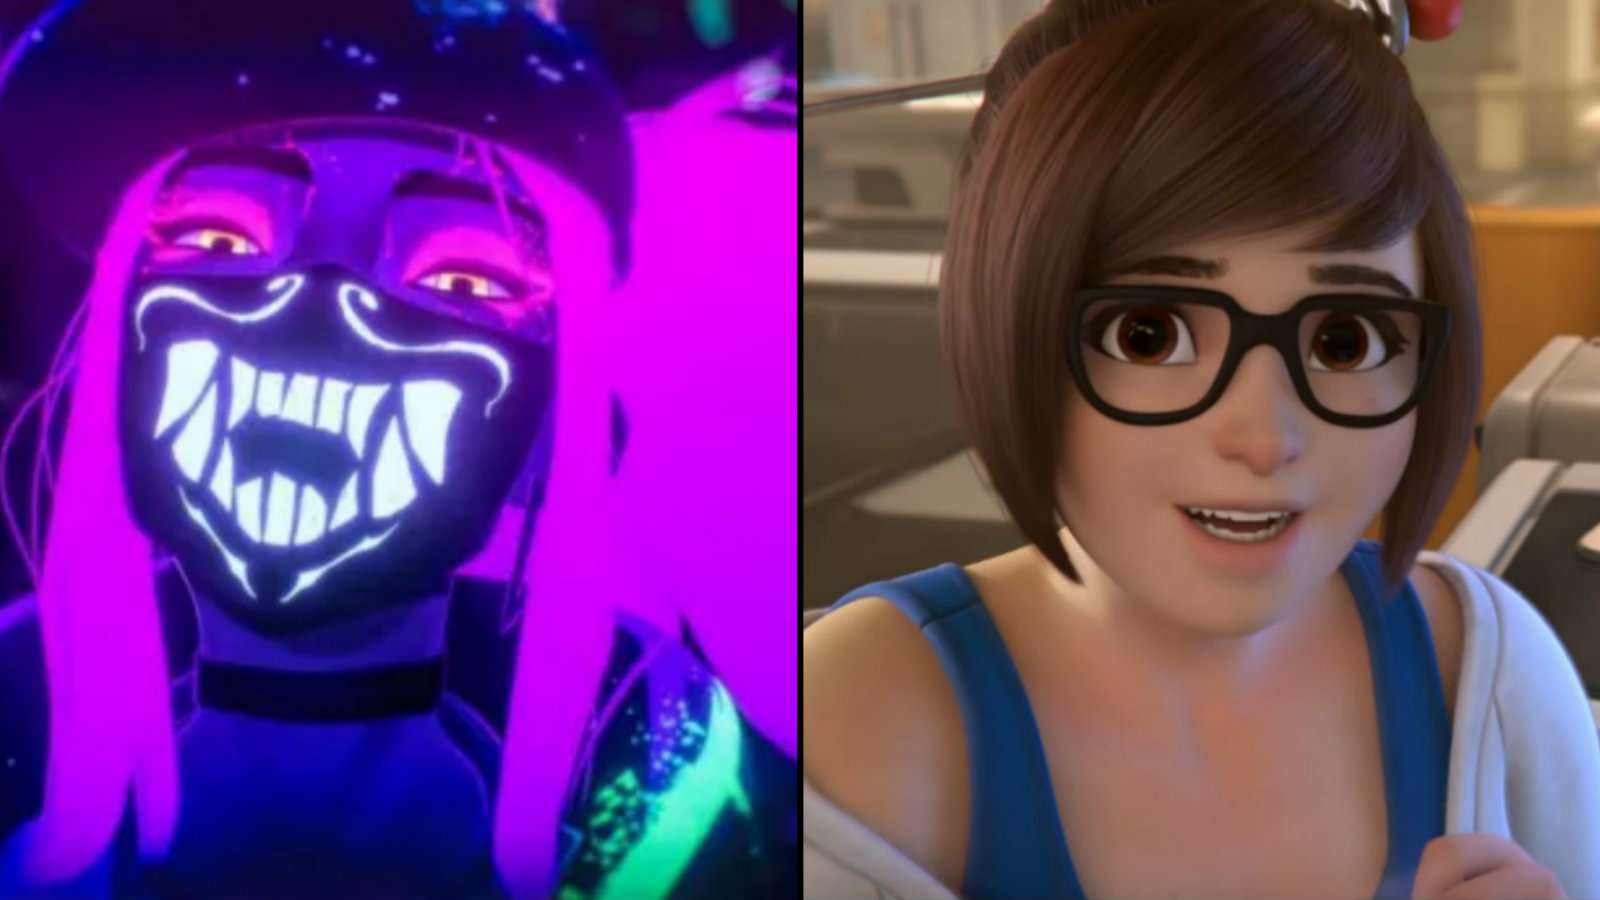 K/DA and Mei from Overwatch